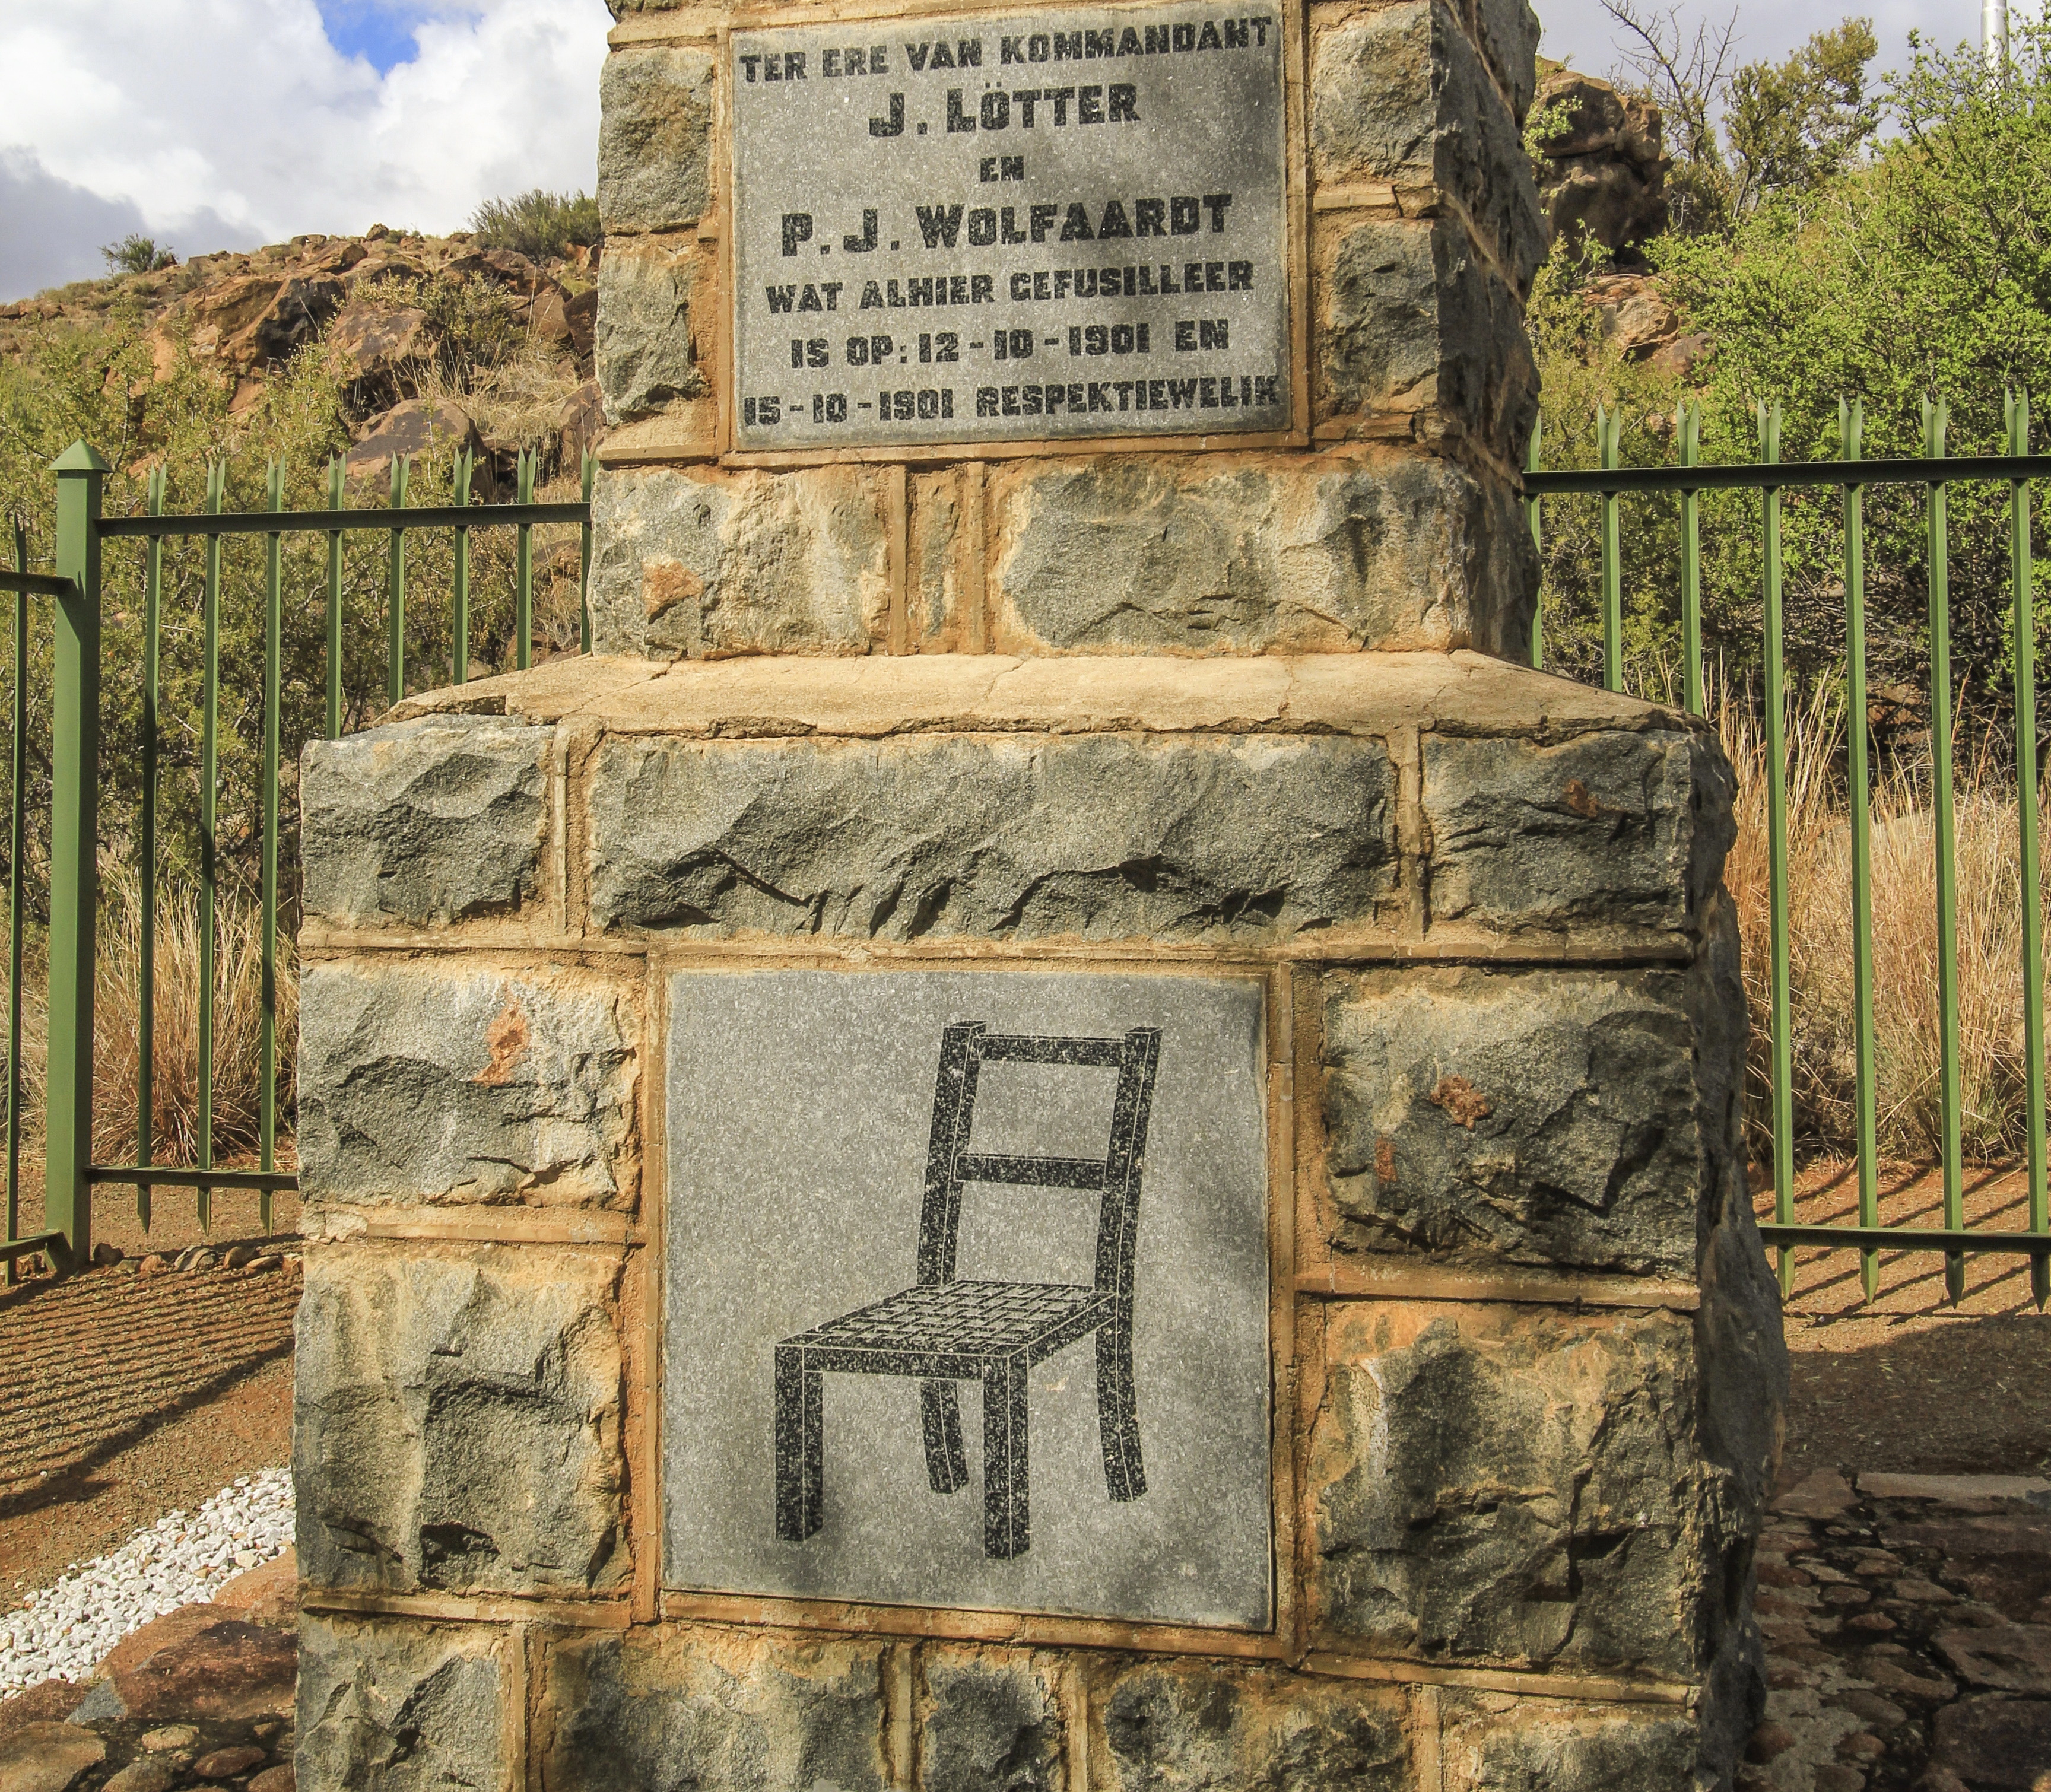 Memorial to Messrs Lotter and Wolfaardt, executed by the British during the 2nd Anglo-Boer War. Image: Chris Marais